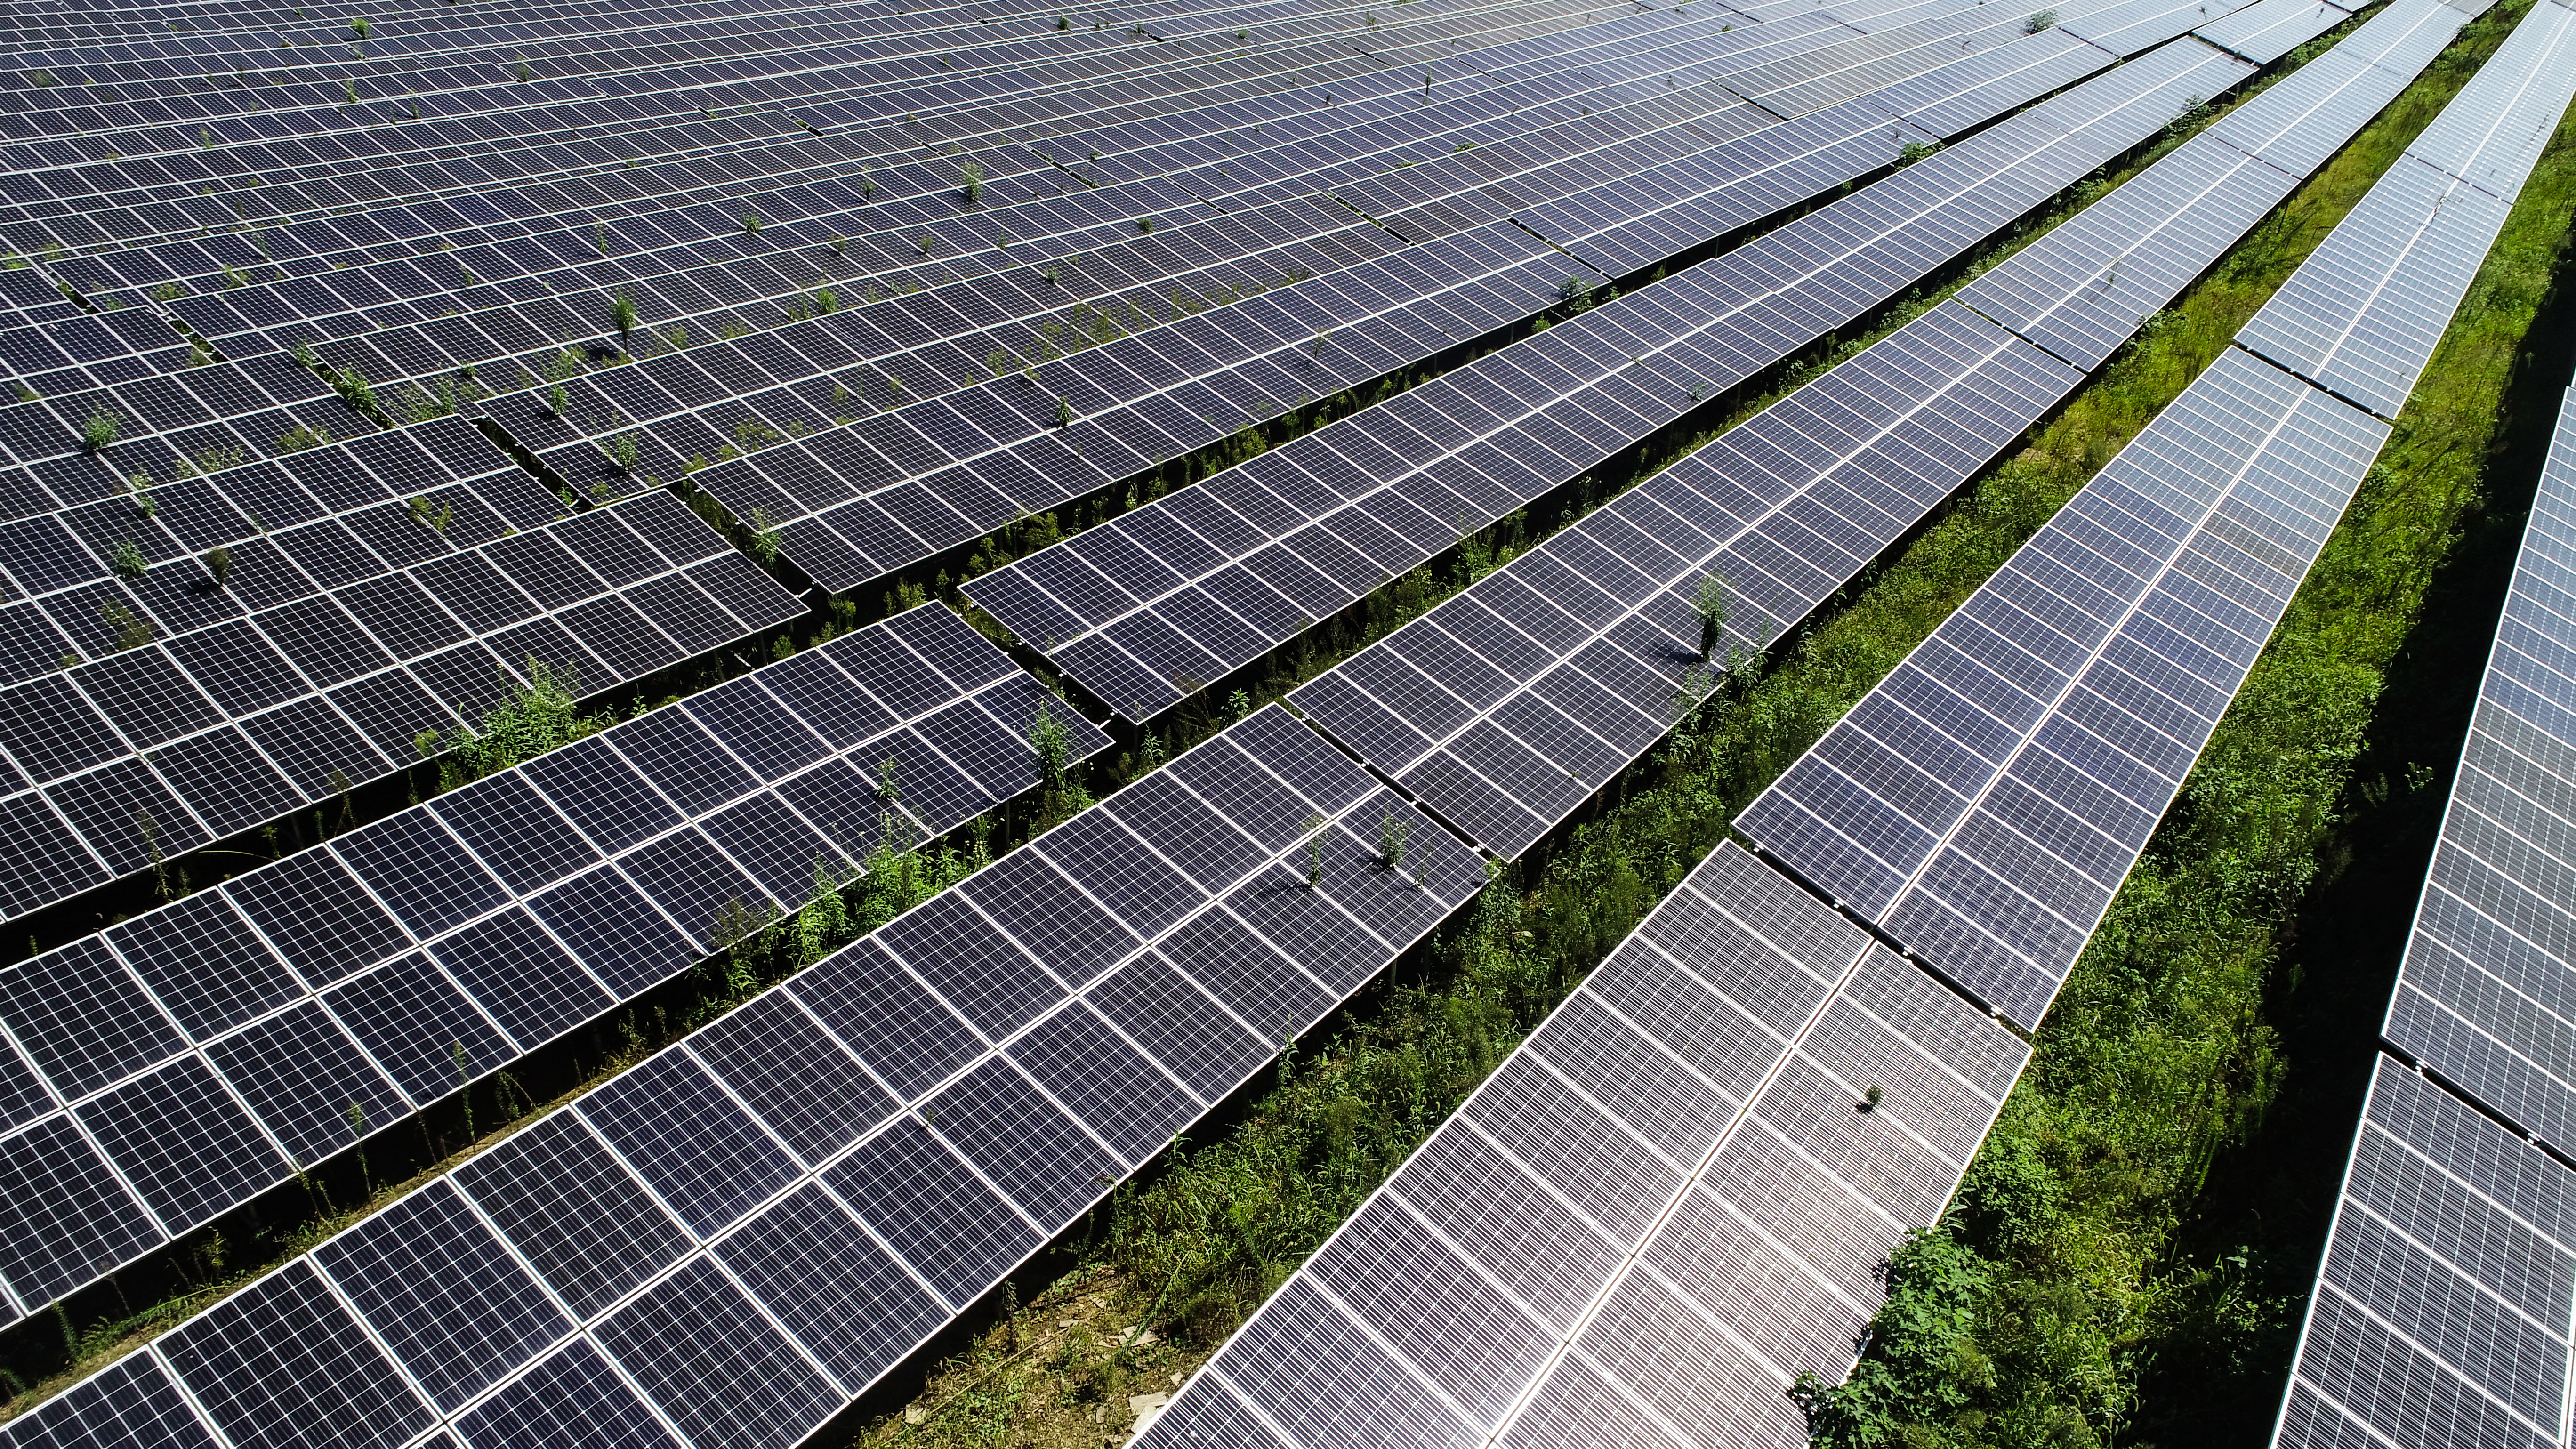 Photovoltaic Products Have Become A New Growth Point For Exports